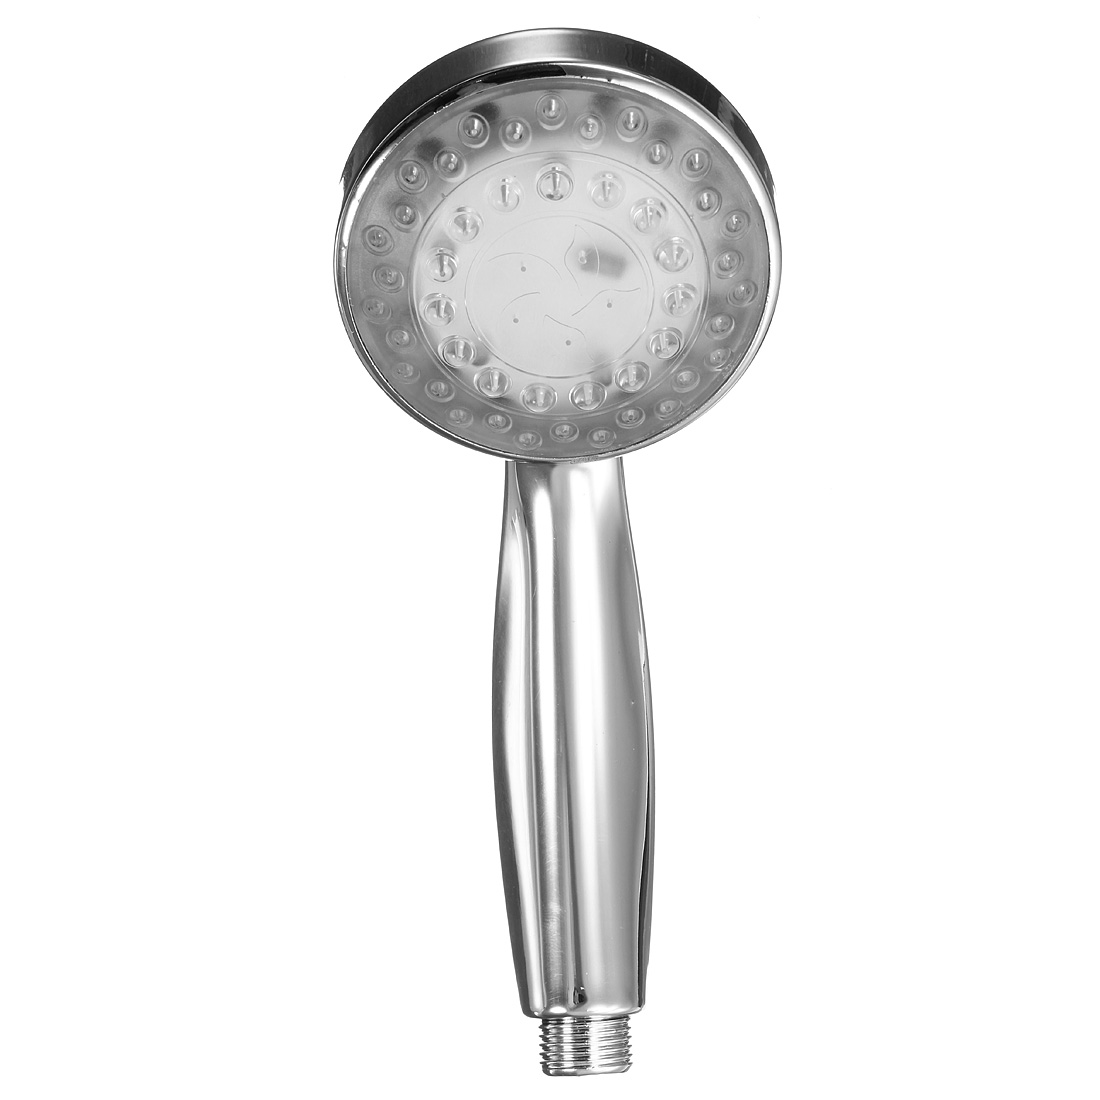 Chrome-Bathroom-Handheld-ABS-LED-Shower-Head-7-Color-Changing-Water-Glow-Light-1442625-6